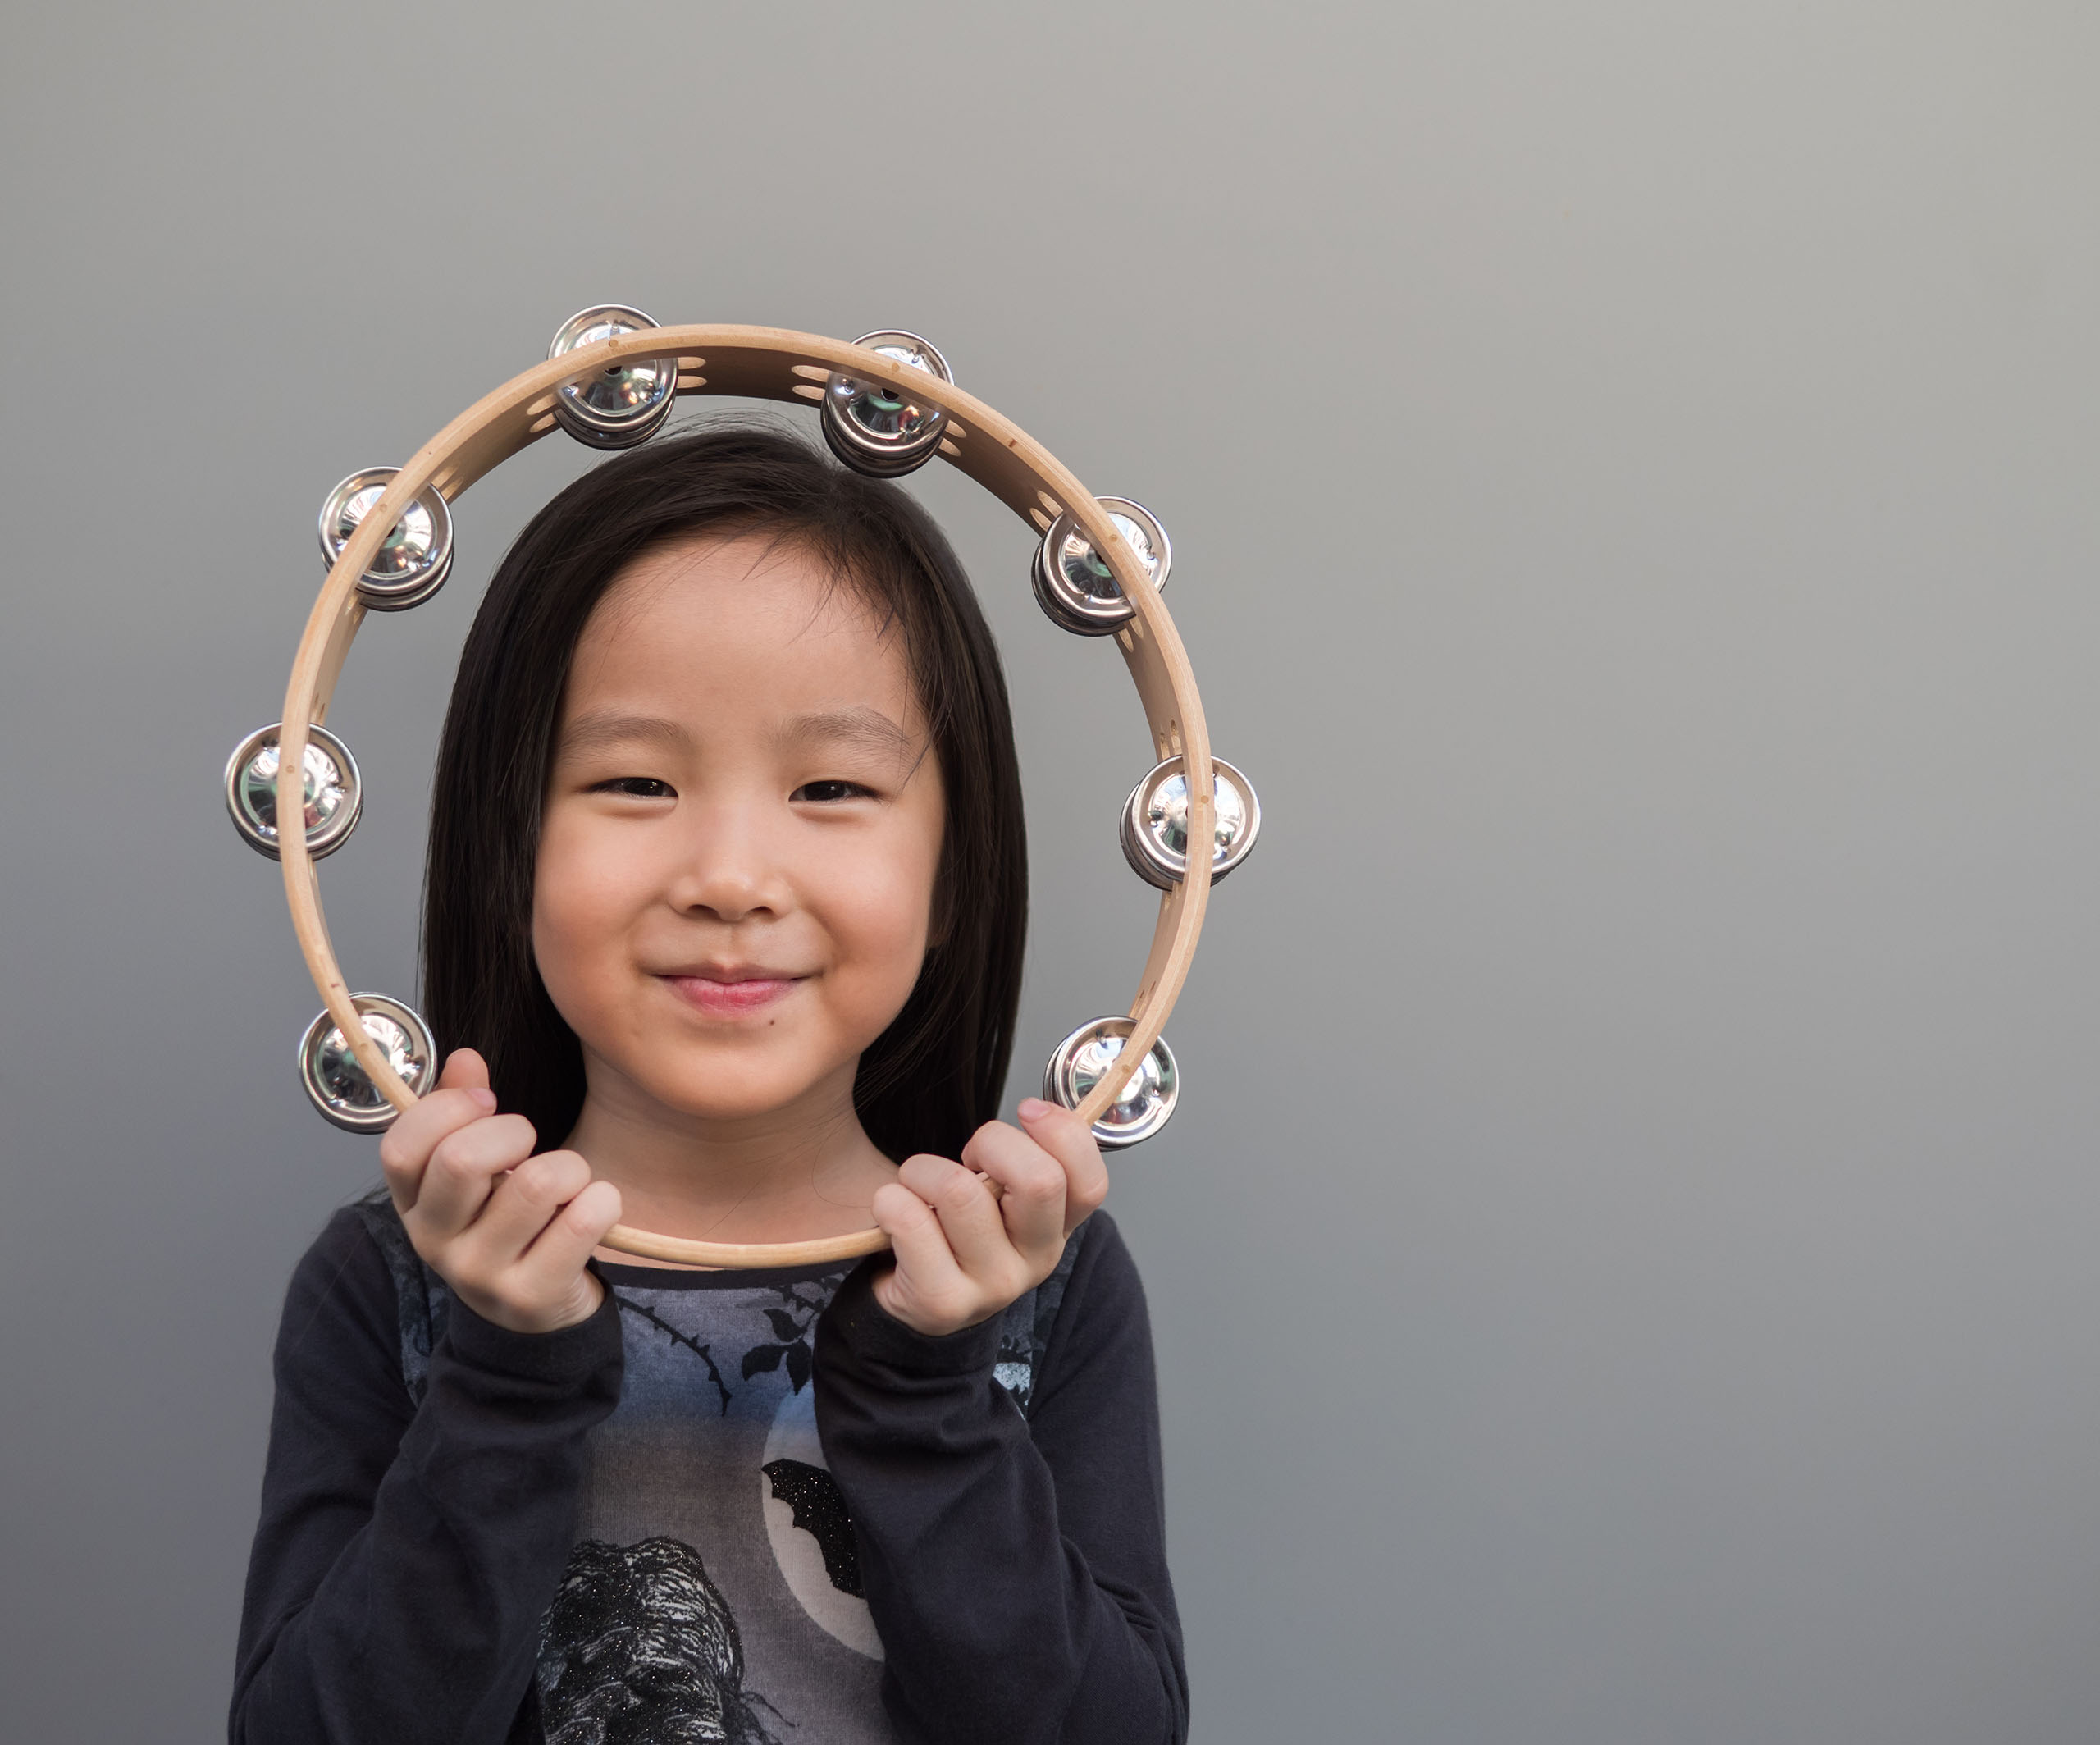 Young girl smiling holding tambourine